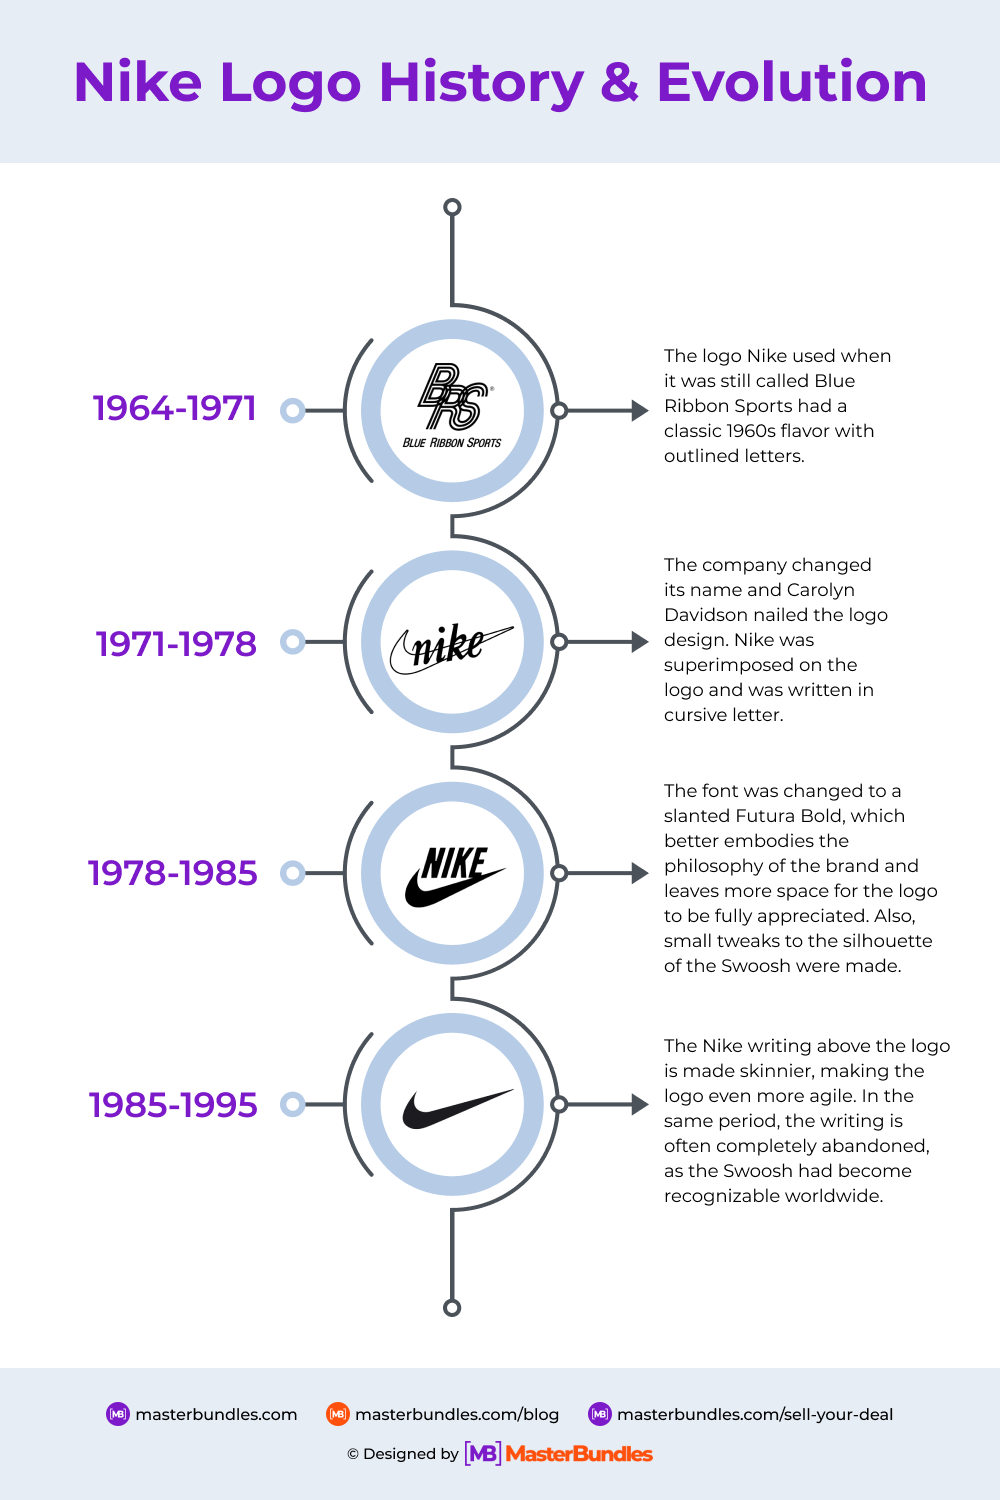 Nike Logo: History, Meaning, Design Influences, and Evolution